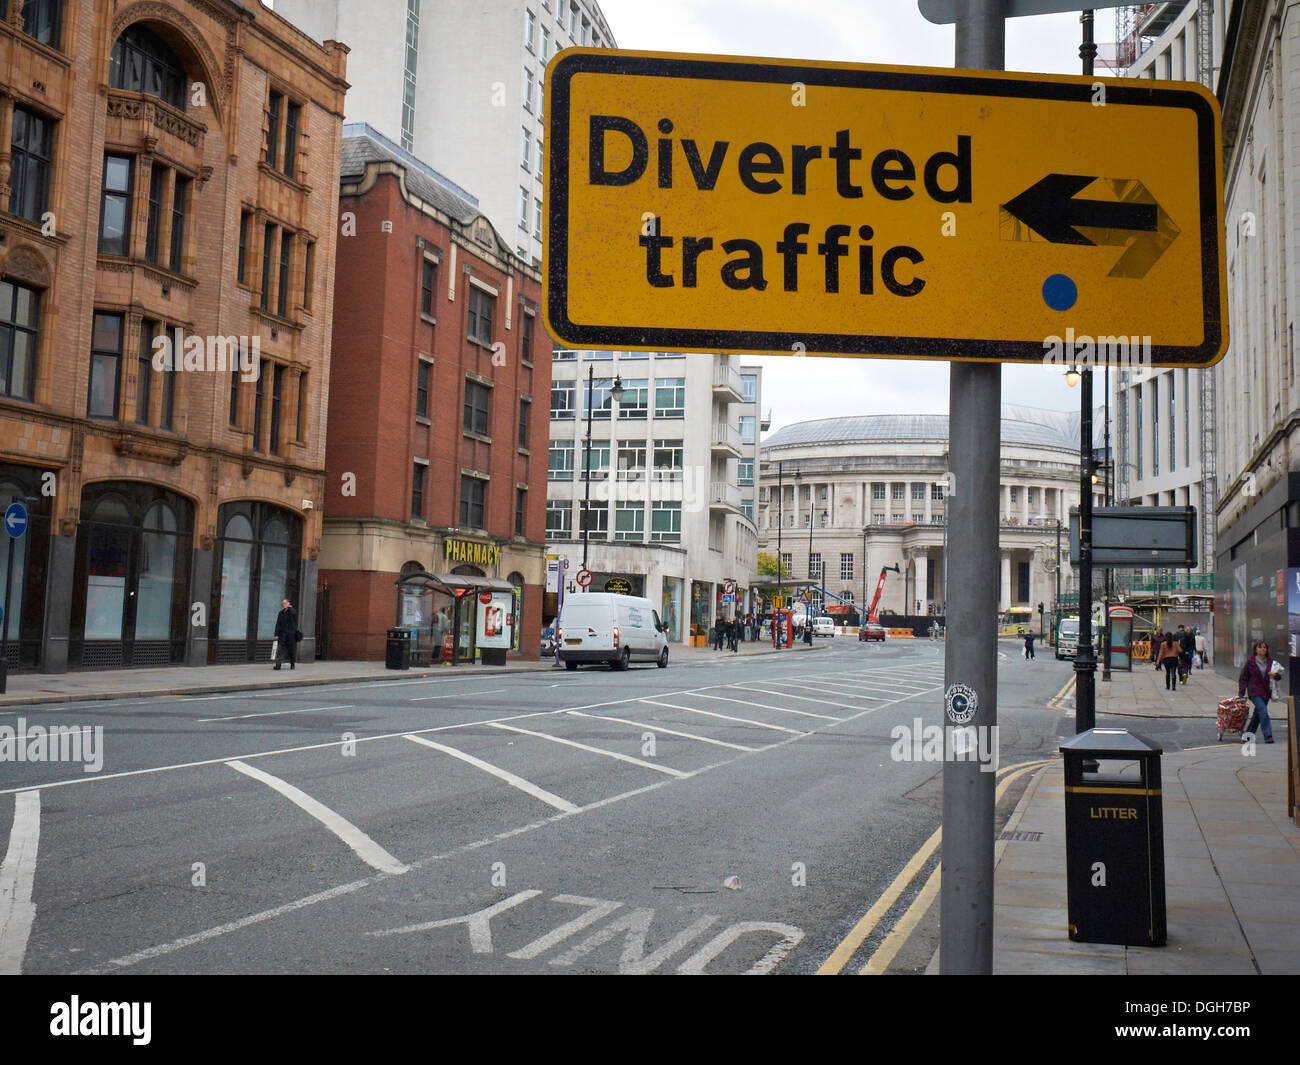 Diverted traffic sign in Oxford Street Manchester UK Stock Photo